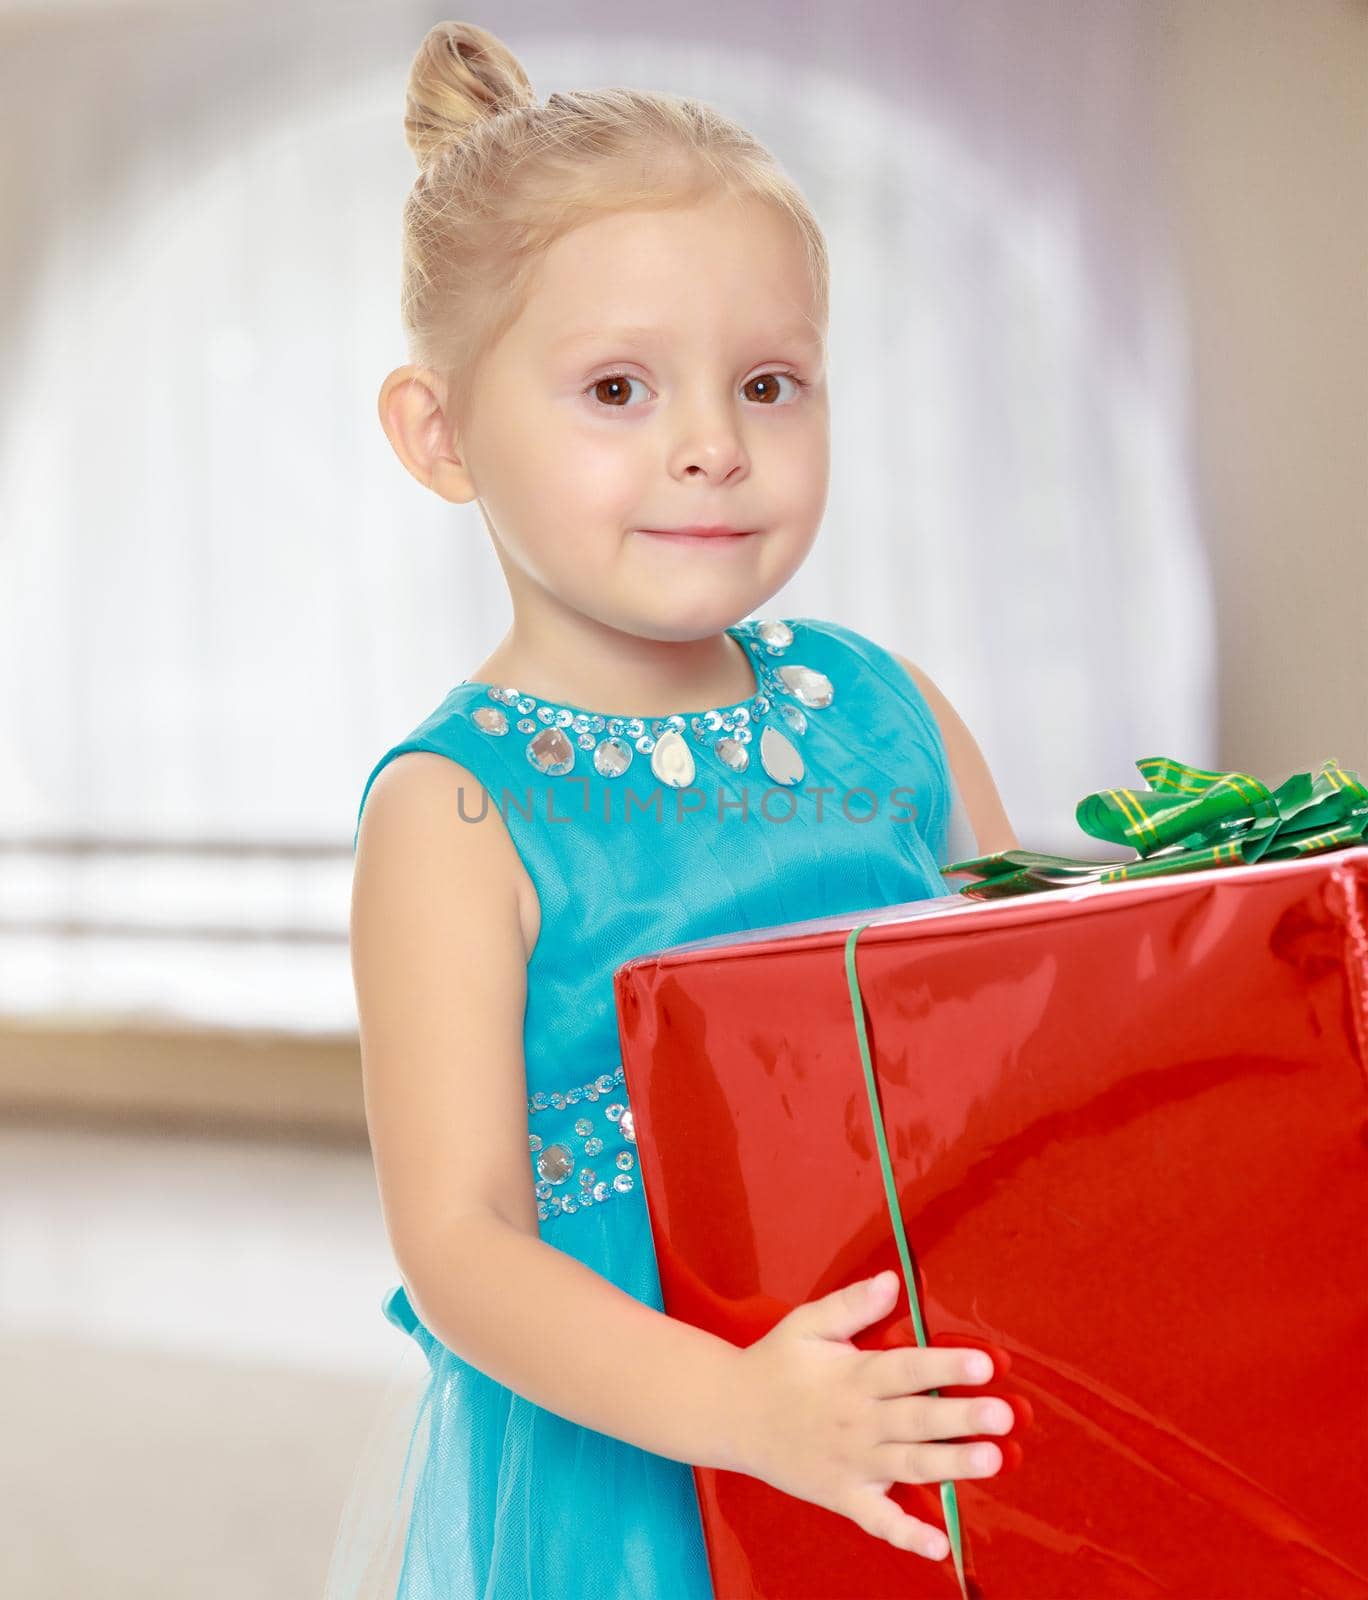 Caucasian little girl in a blue dress, holding the hands of the big red box that is a gift.Girl holding a box in front of him.